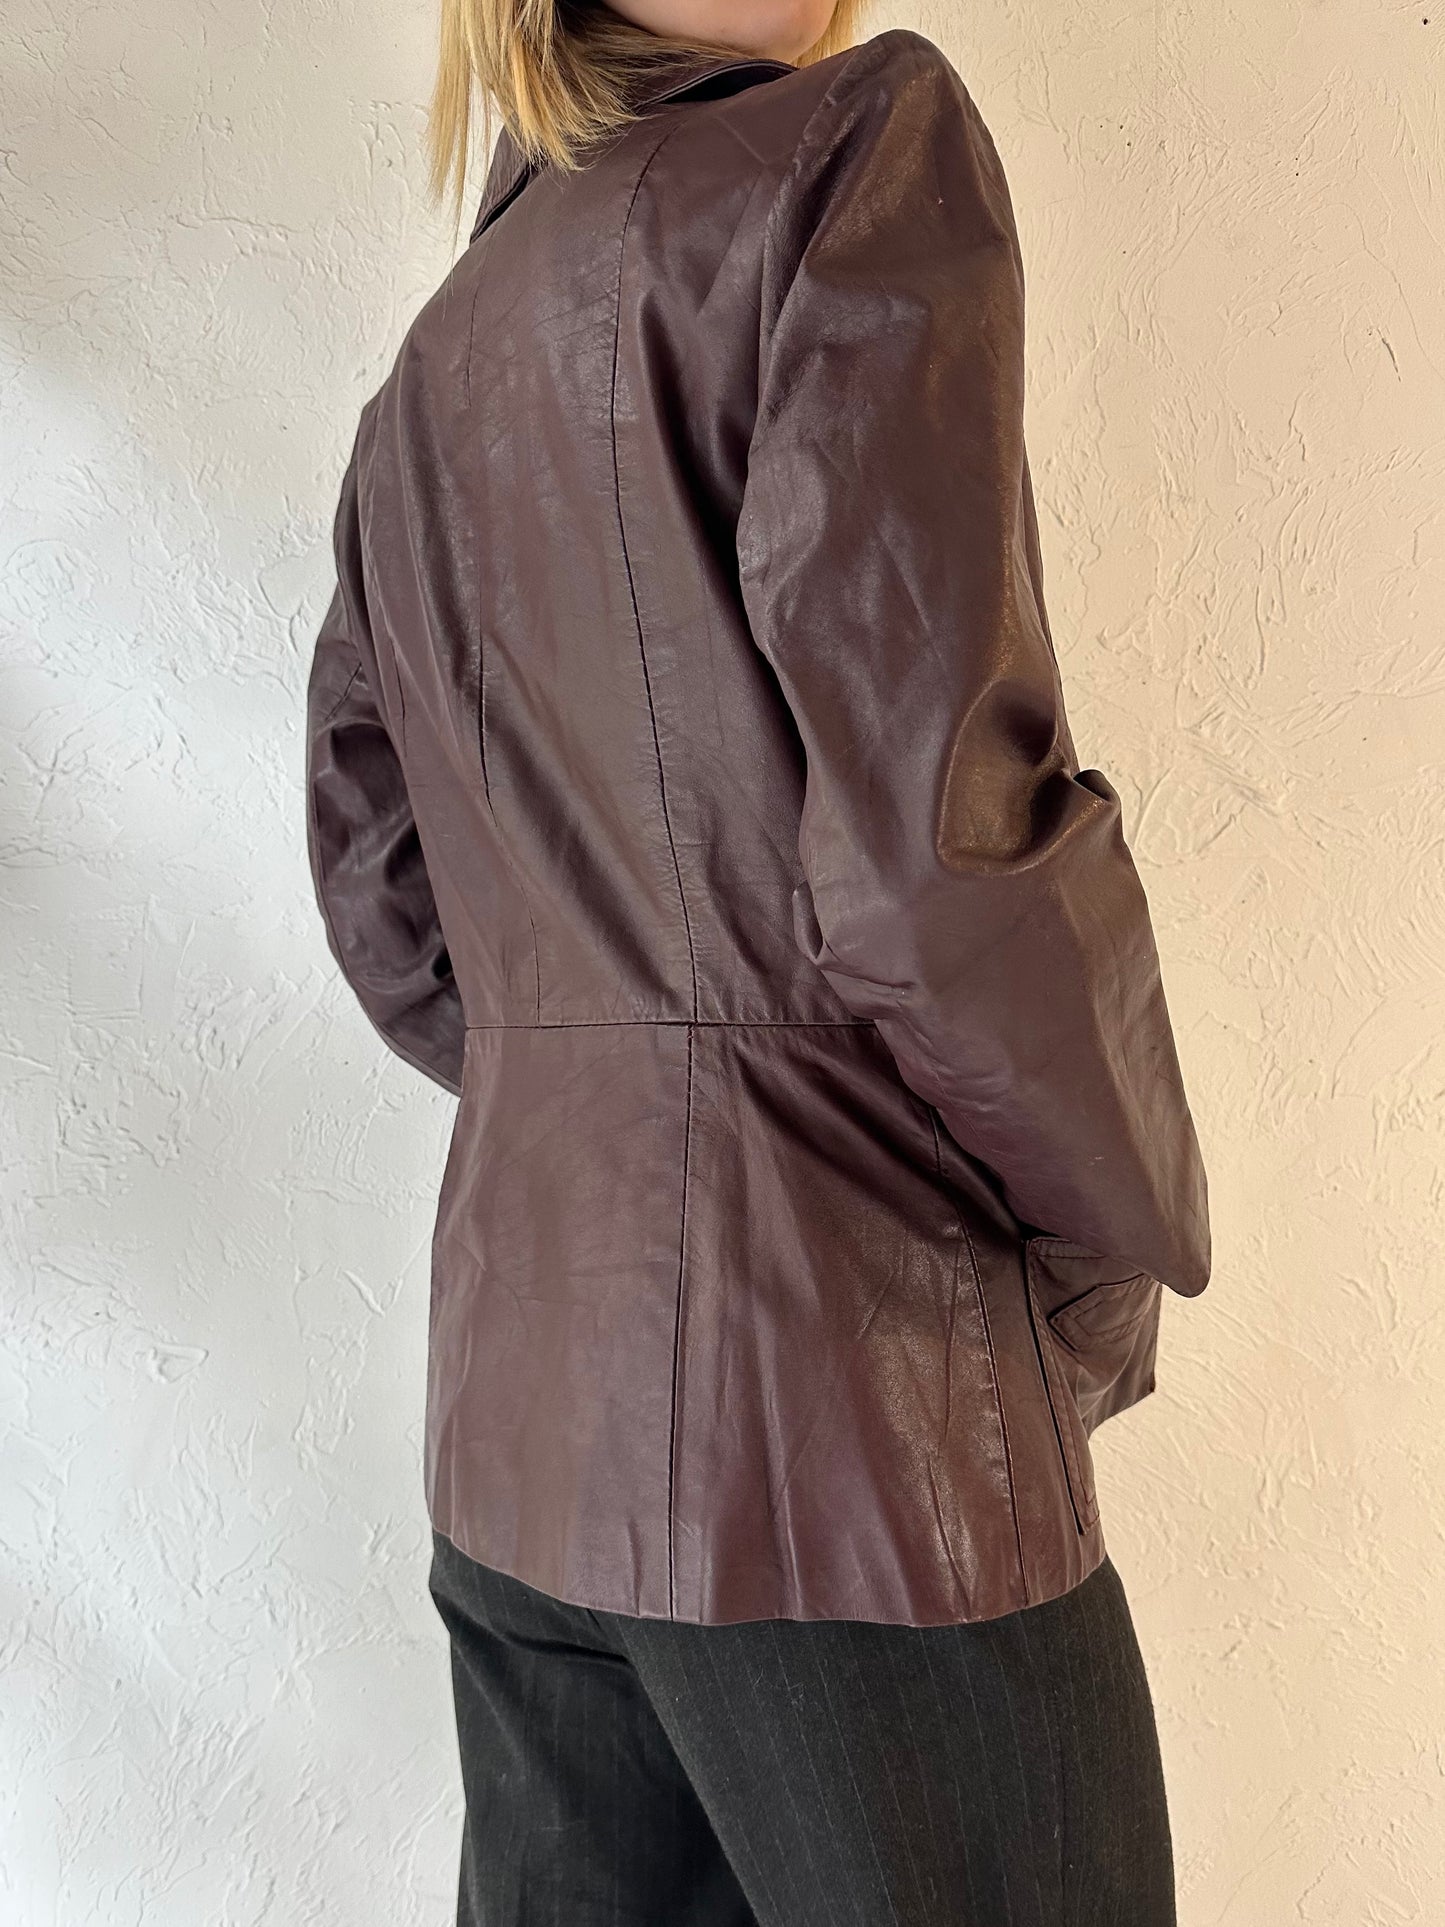 70s 'Genuine Leather' Brown Leather Jacket / Large